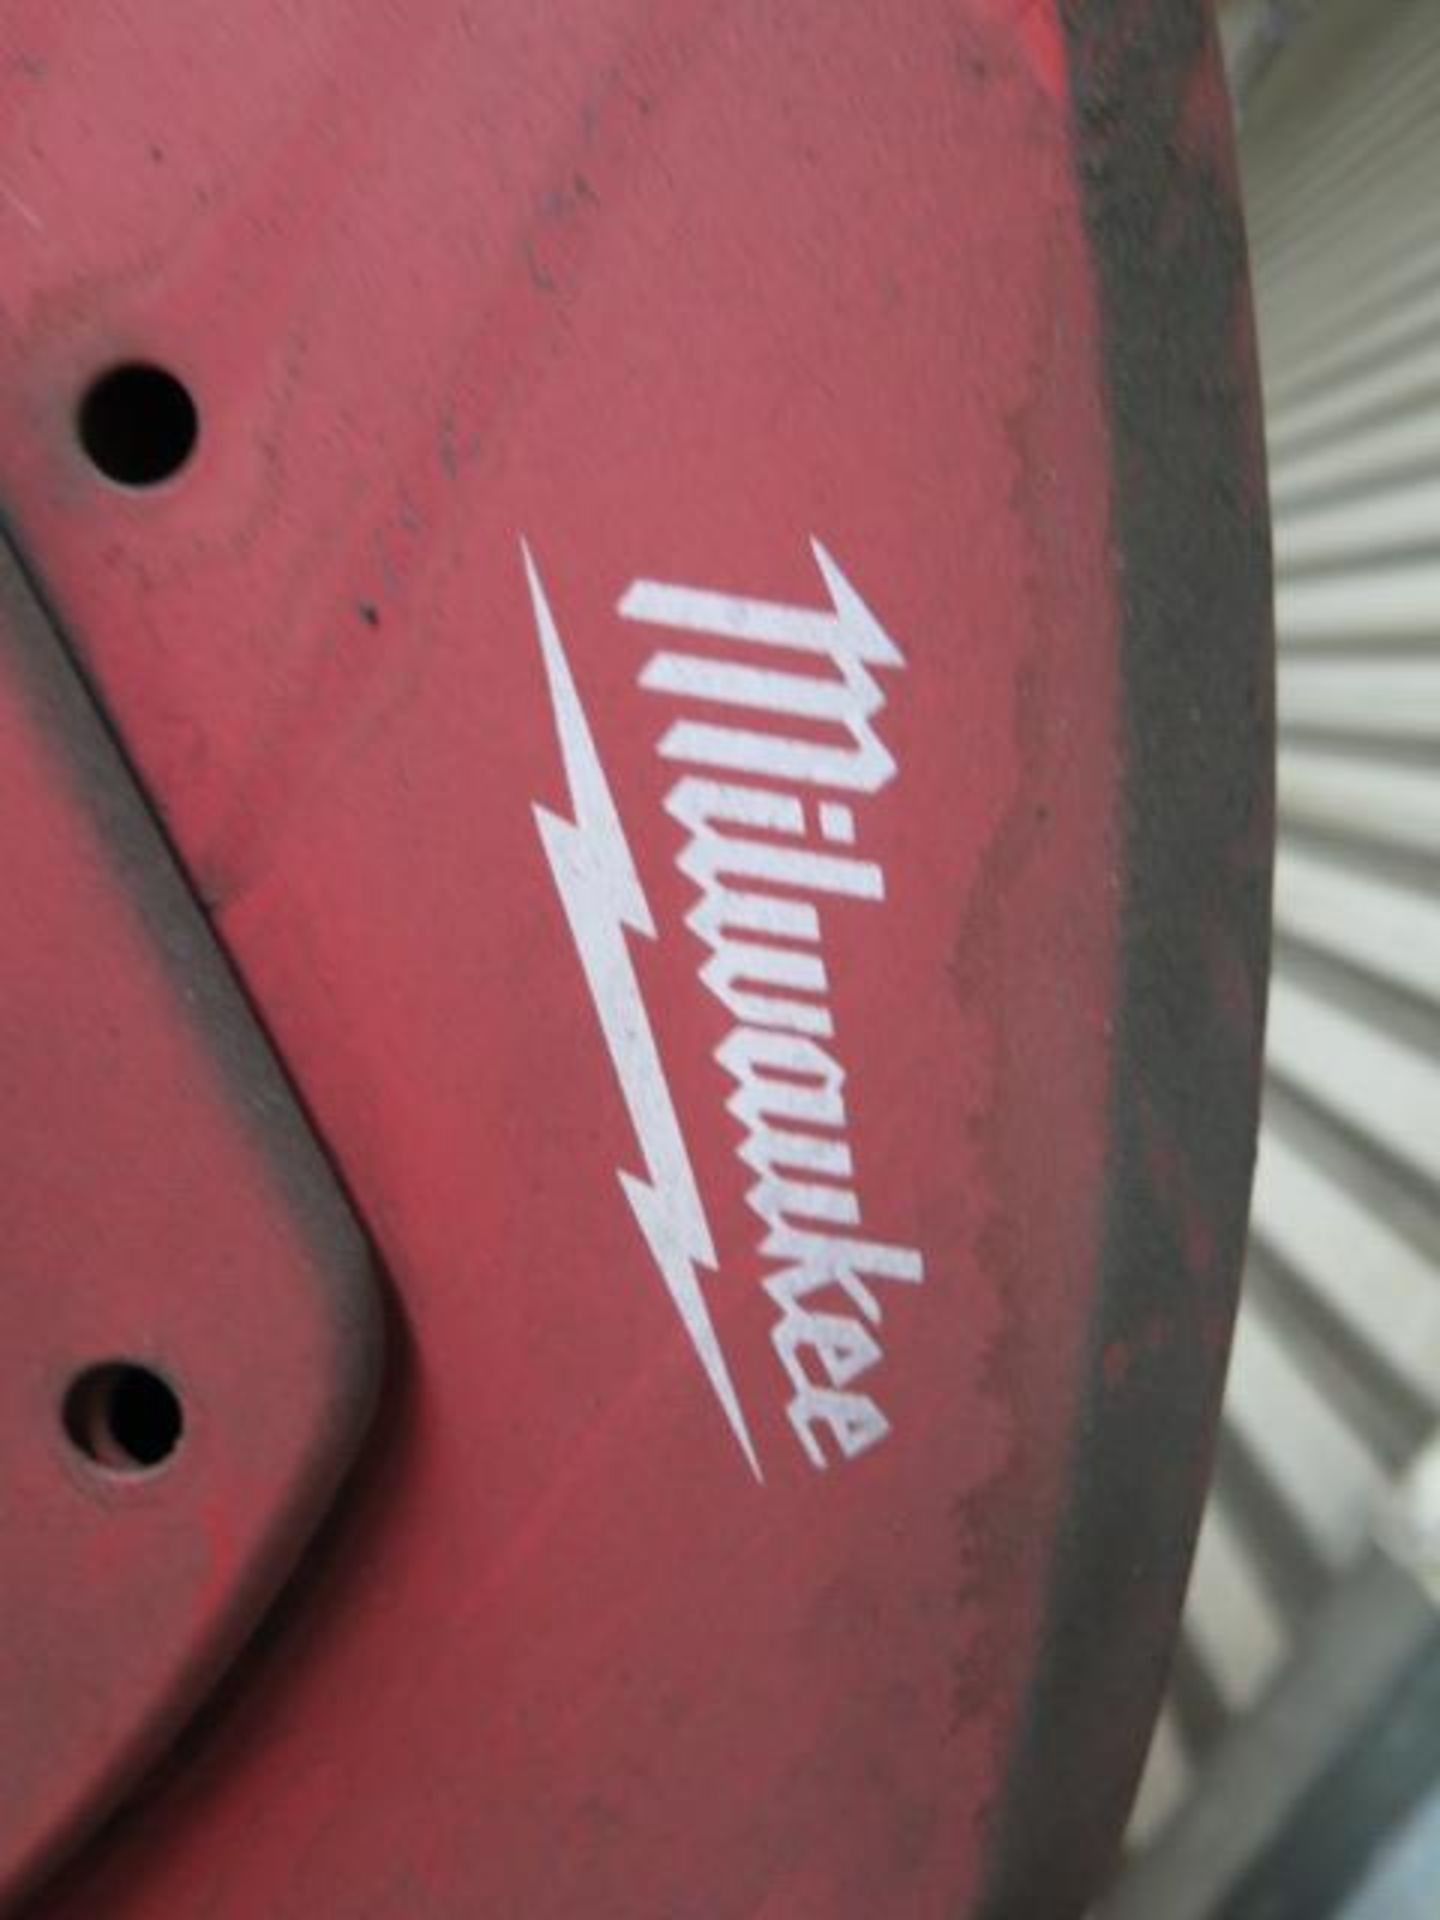 Milwaukee 14” Abrasive Cutoff Saw w/ Stand (SOLD AS-IS - NO WARRANTY) - Image 5 of 5